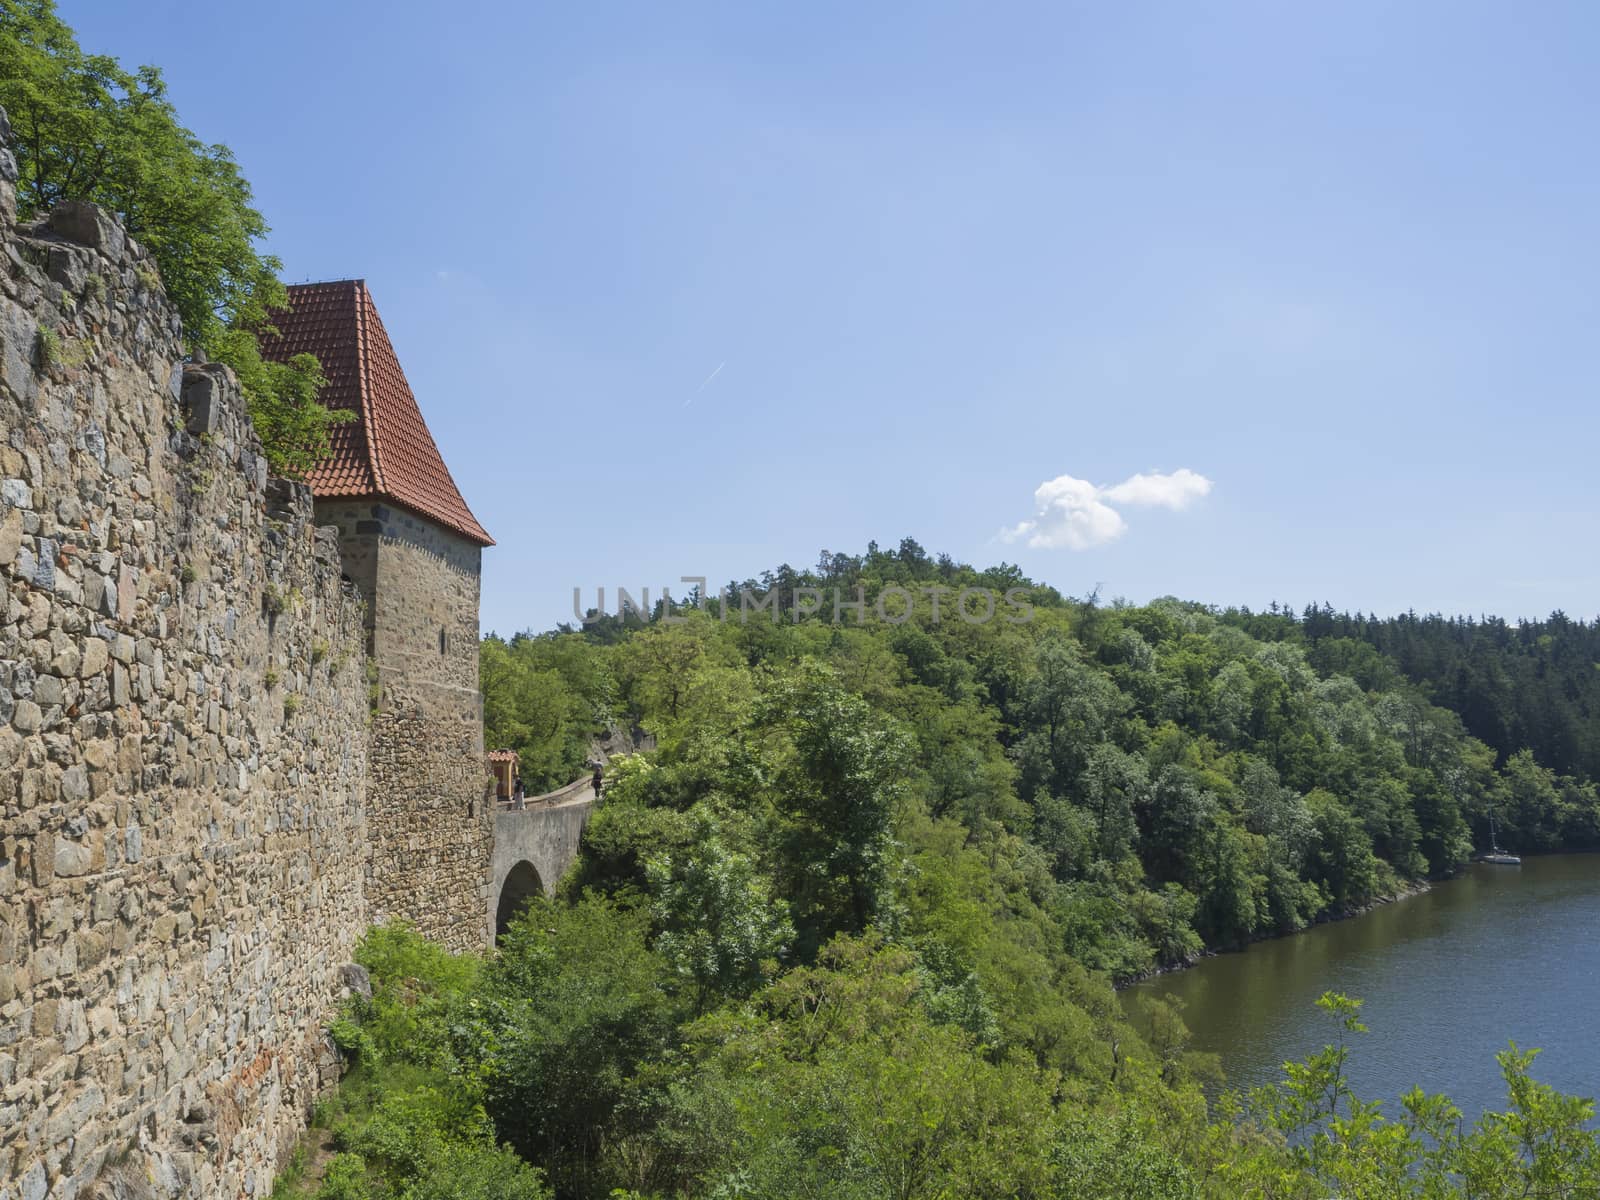 view from rampart of medieval castle Zvikov (Klingenberg), wall with tower, vltava river, spring green trees and blue sky, Czech Republic